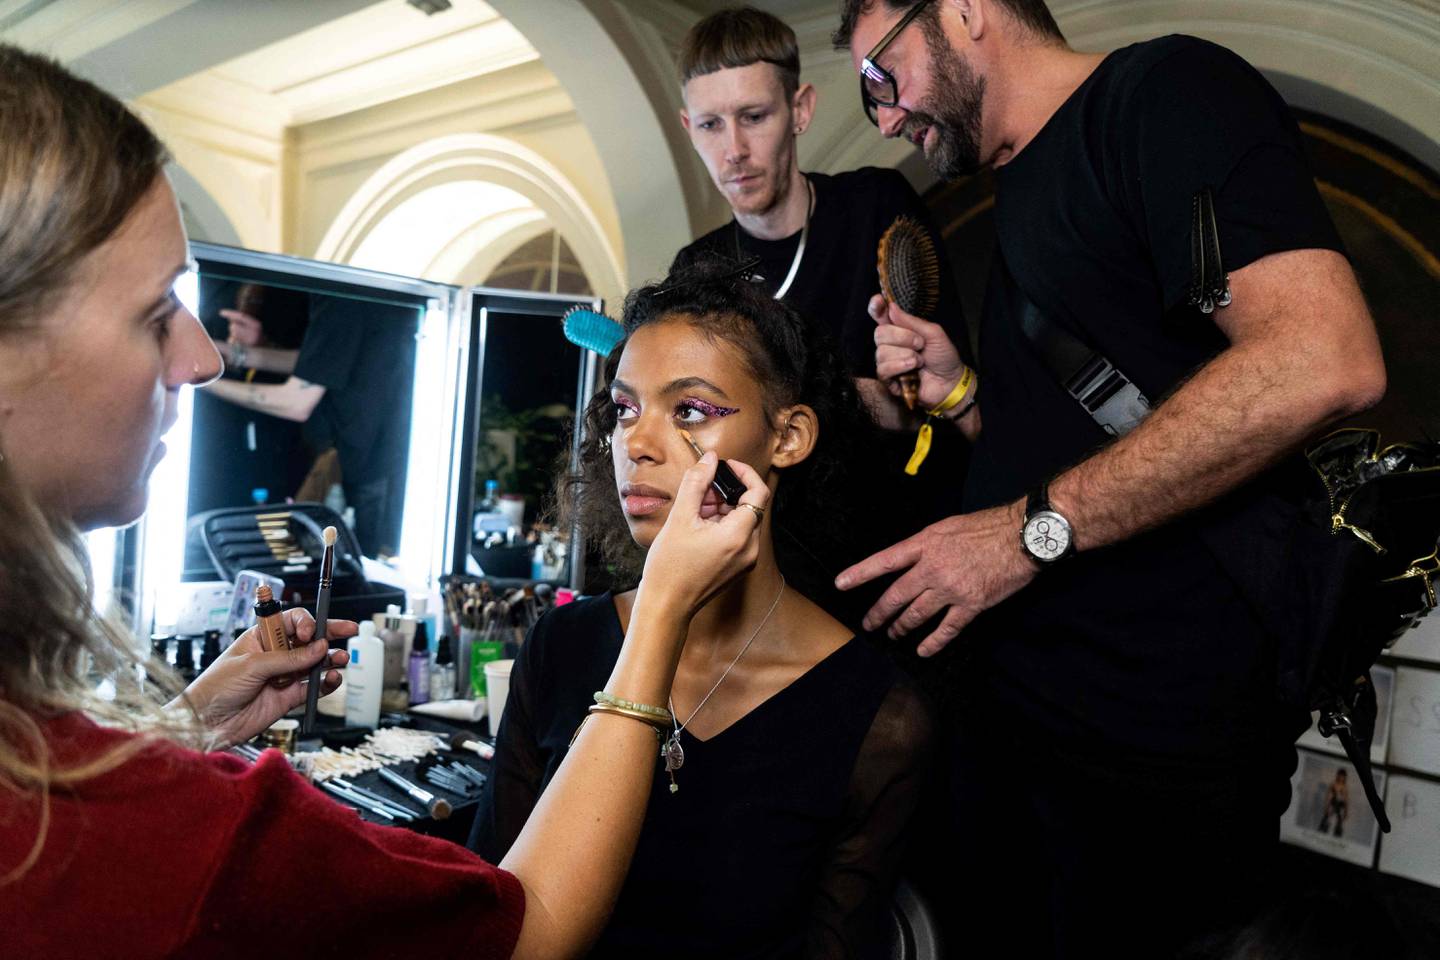 A model gets ready backstage prior to the Halpern spring/summer 2023 show on Sunday, the fourth day of London Fashion Week. All shows and events for Monday have been cancelled as a mark of respect to Queen Elizabeth II. AFP